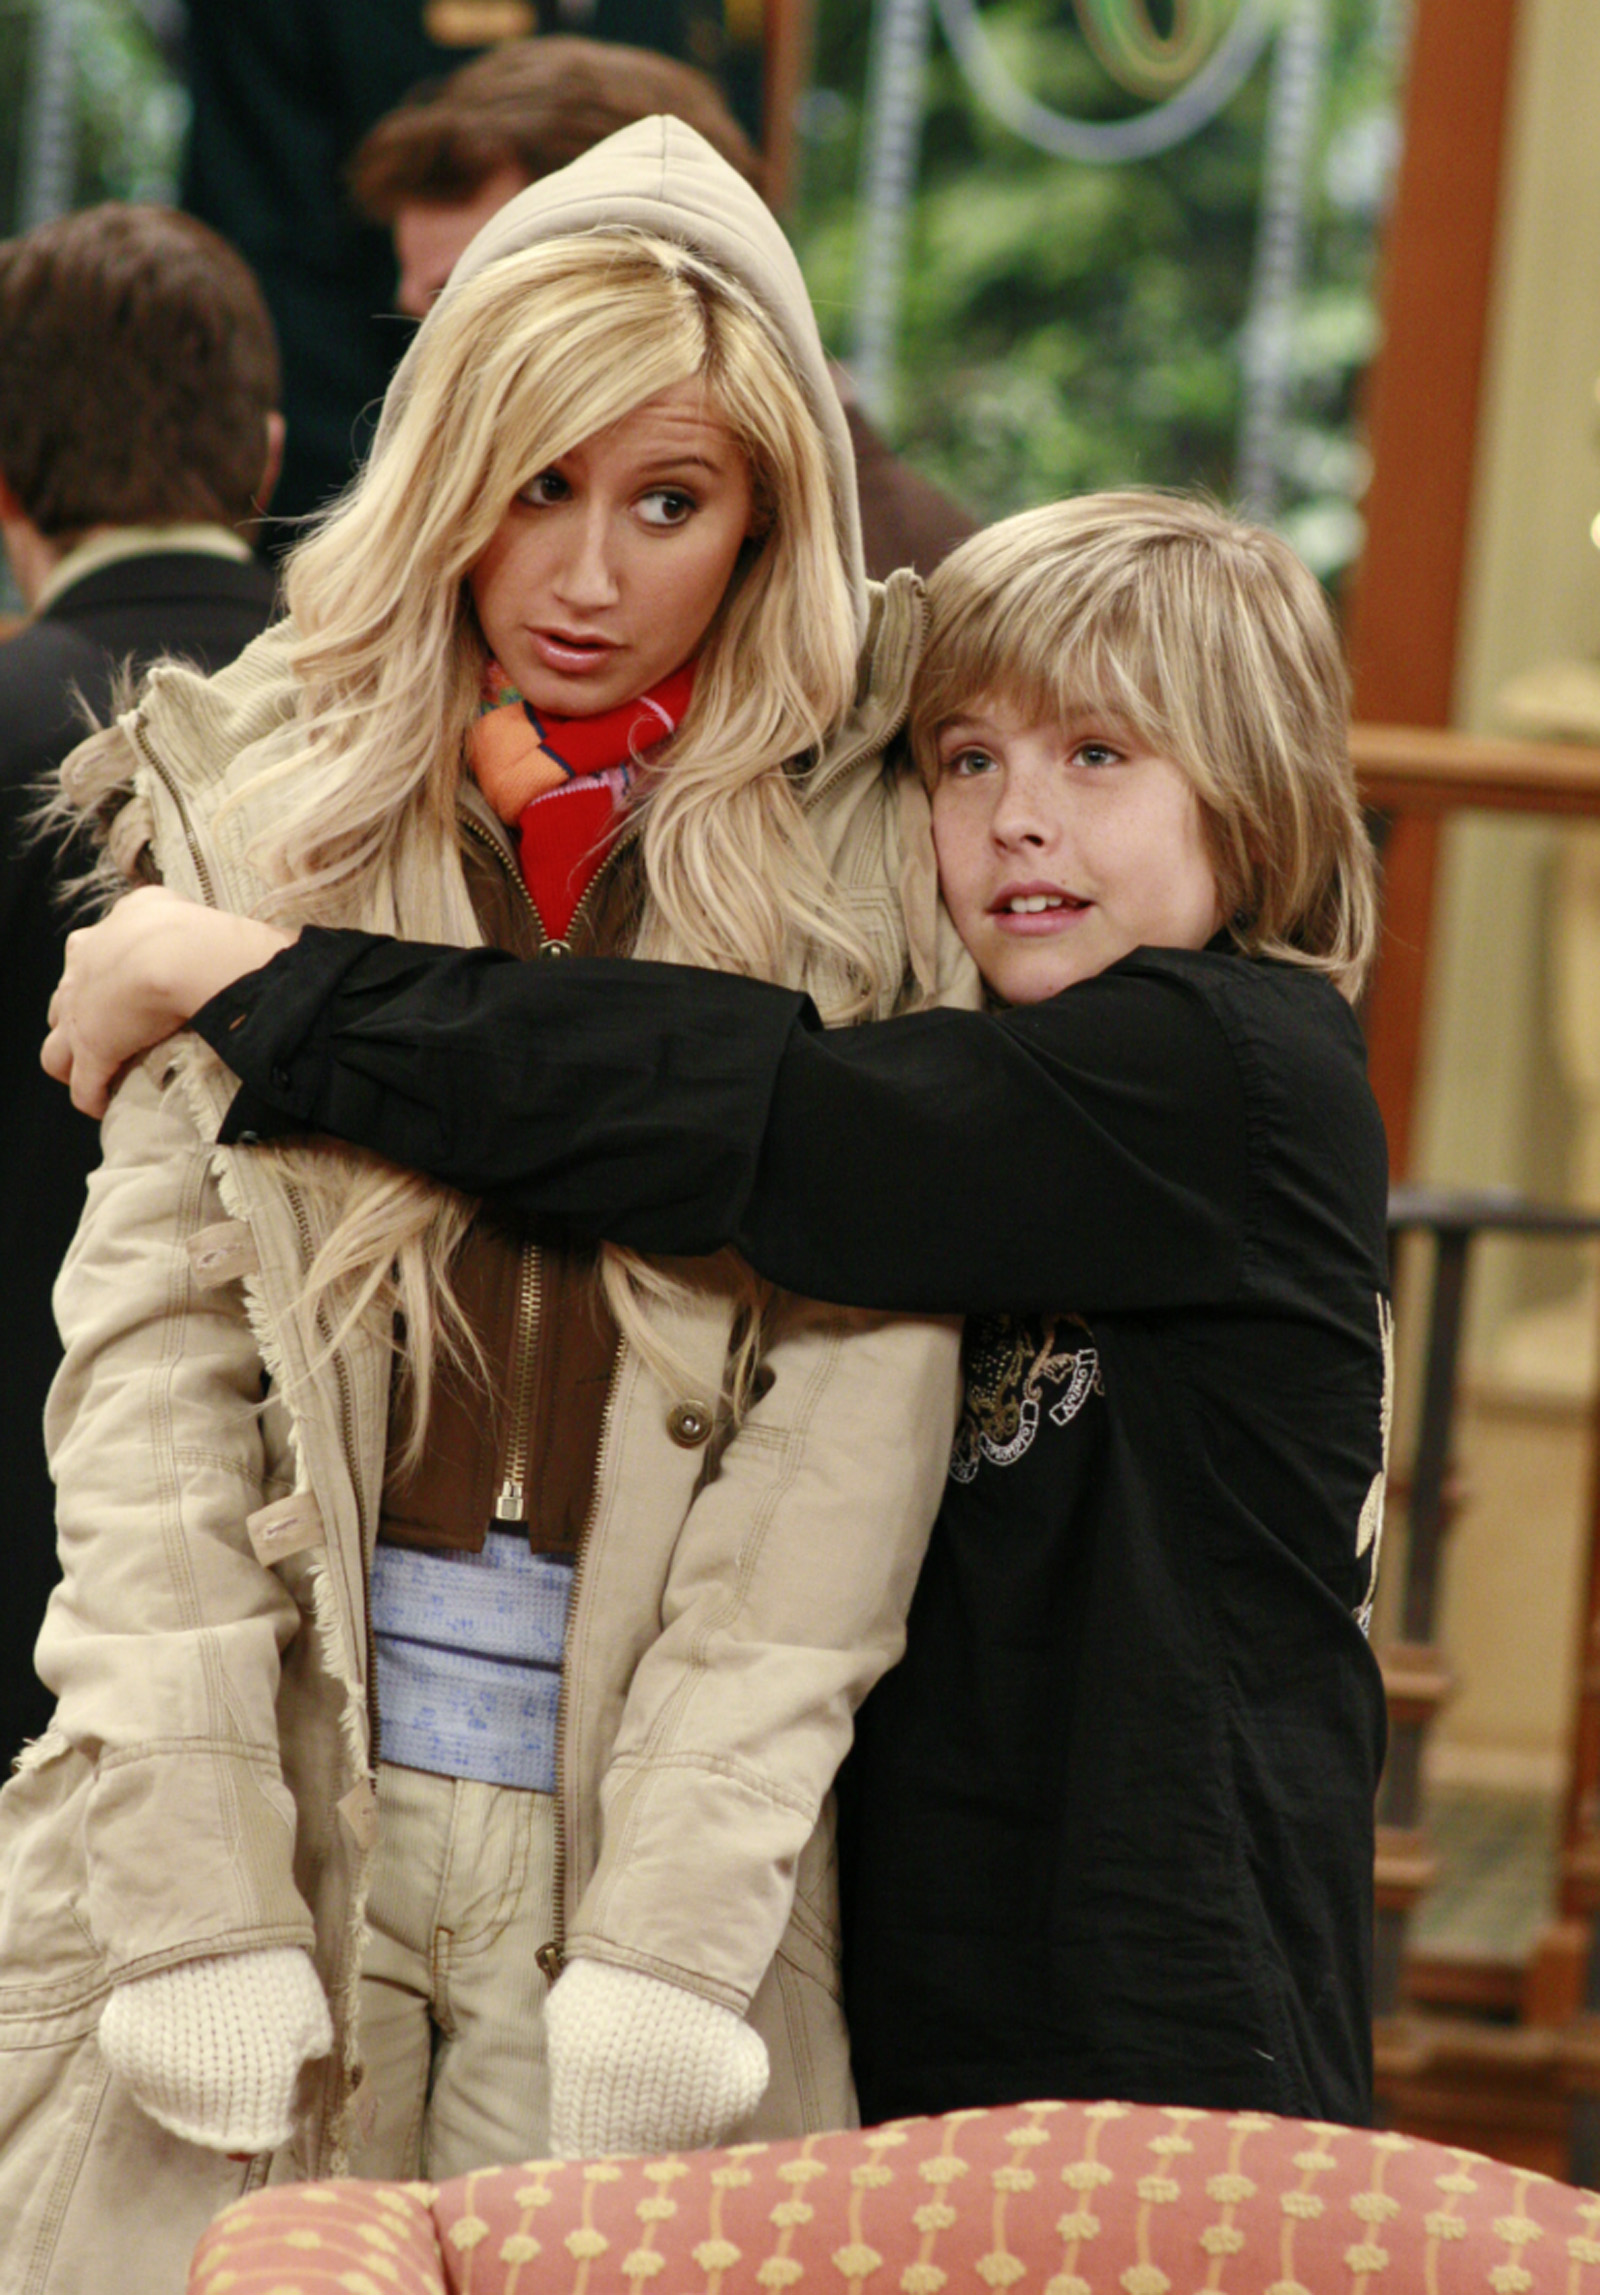 Dylan Sprouse in The Suite Life of Zack and Cody (Season 3)